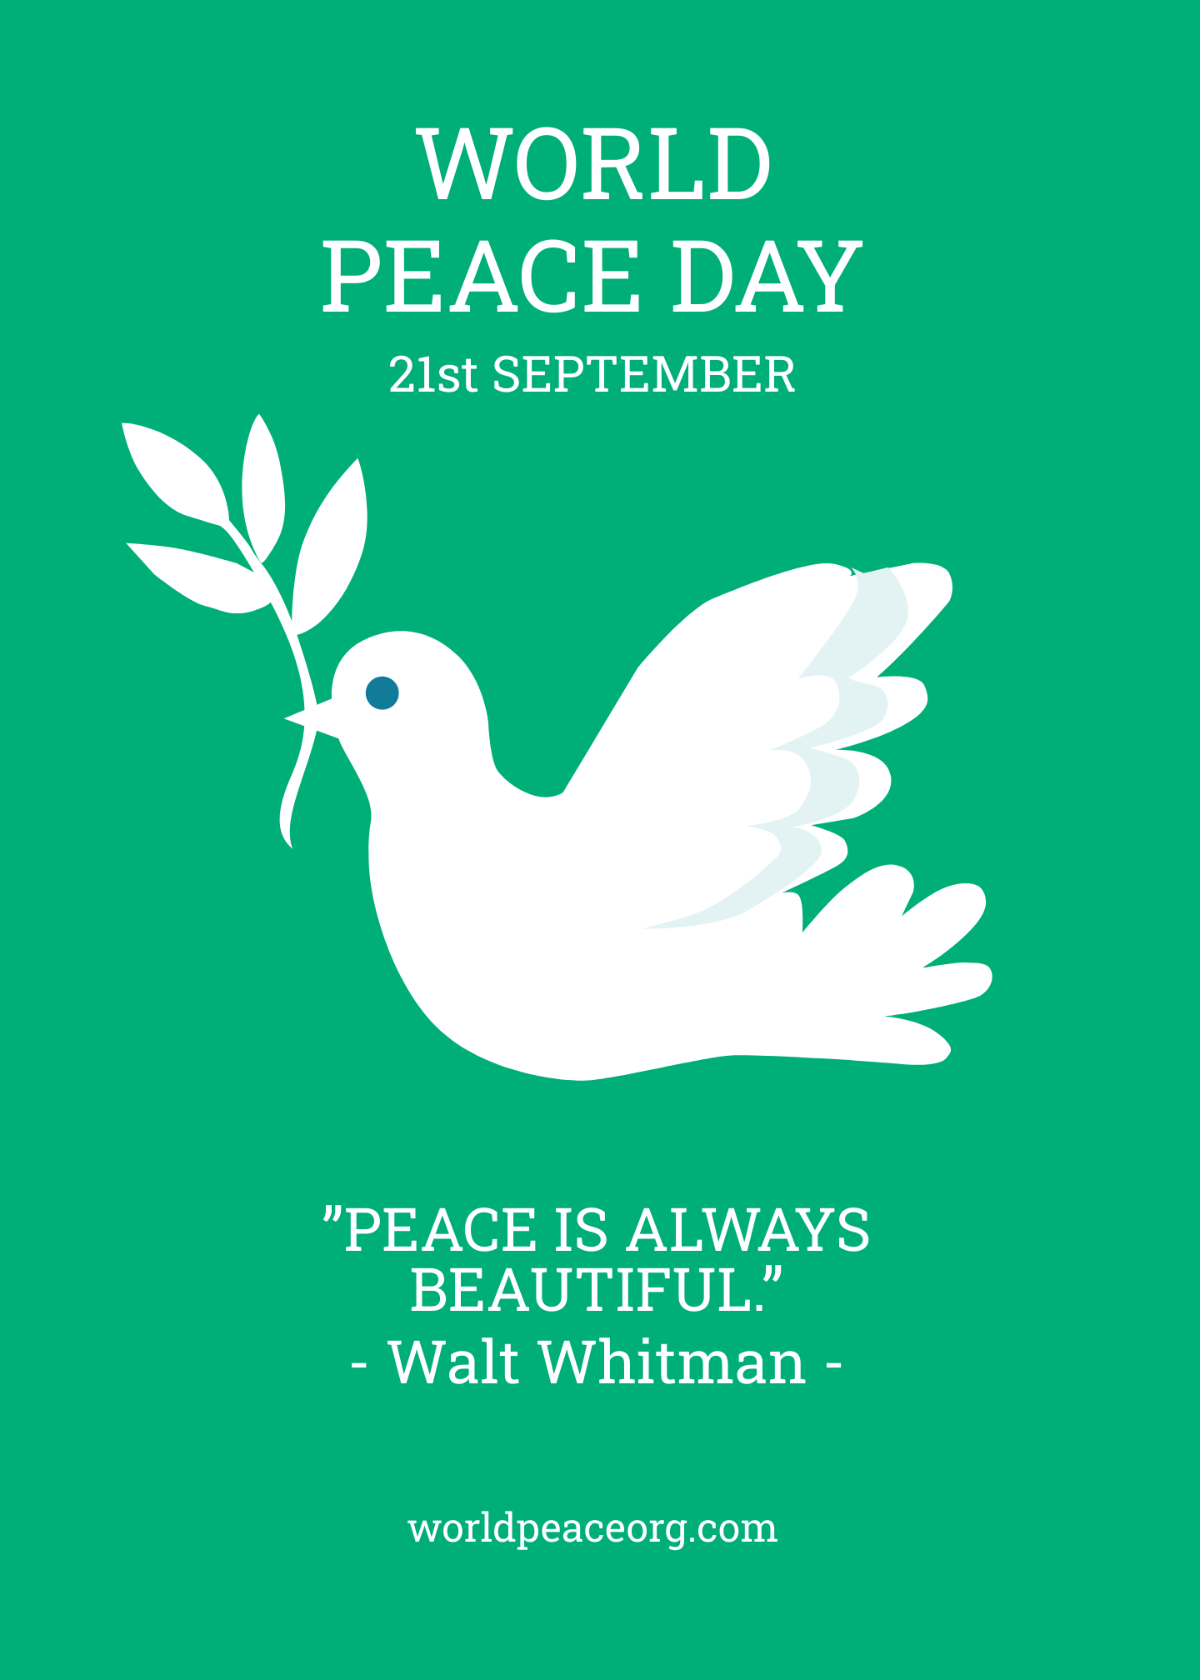 World Peace Day Greeting Card Template